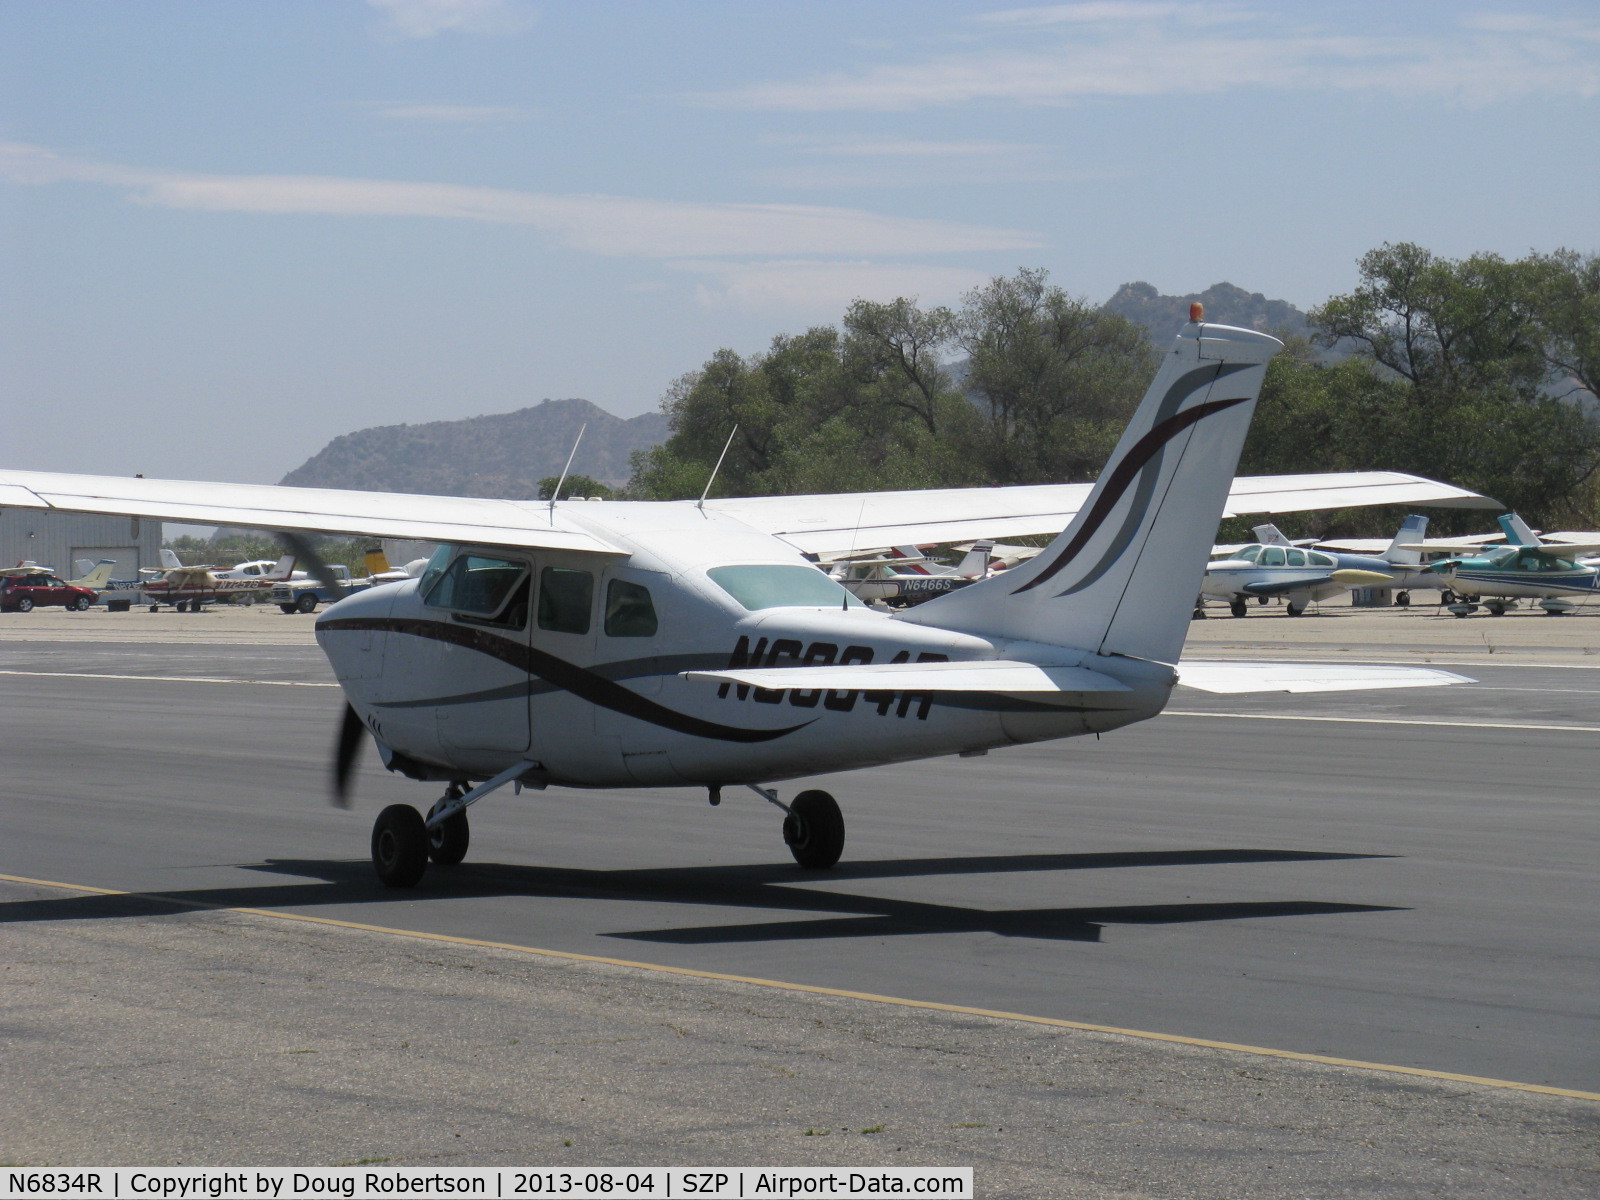 N6834R, 1966 Cessna T210G Turbo Centurion C/N T210-0234, 1966 Cessna T210G TURBO CENTURION, Continental TSIO-520-C 285 Hp, fixed-gear conversion with less weight, more interior space, lower insurance & maint. costs. Taxi